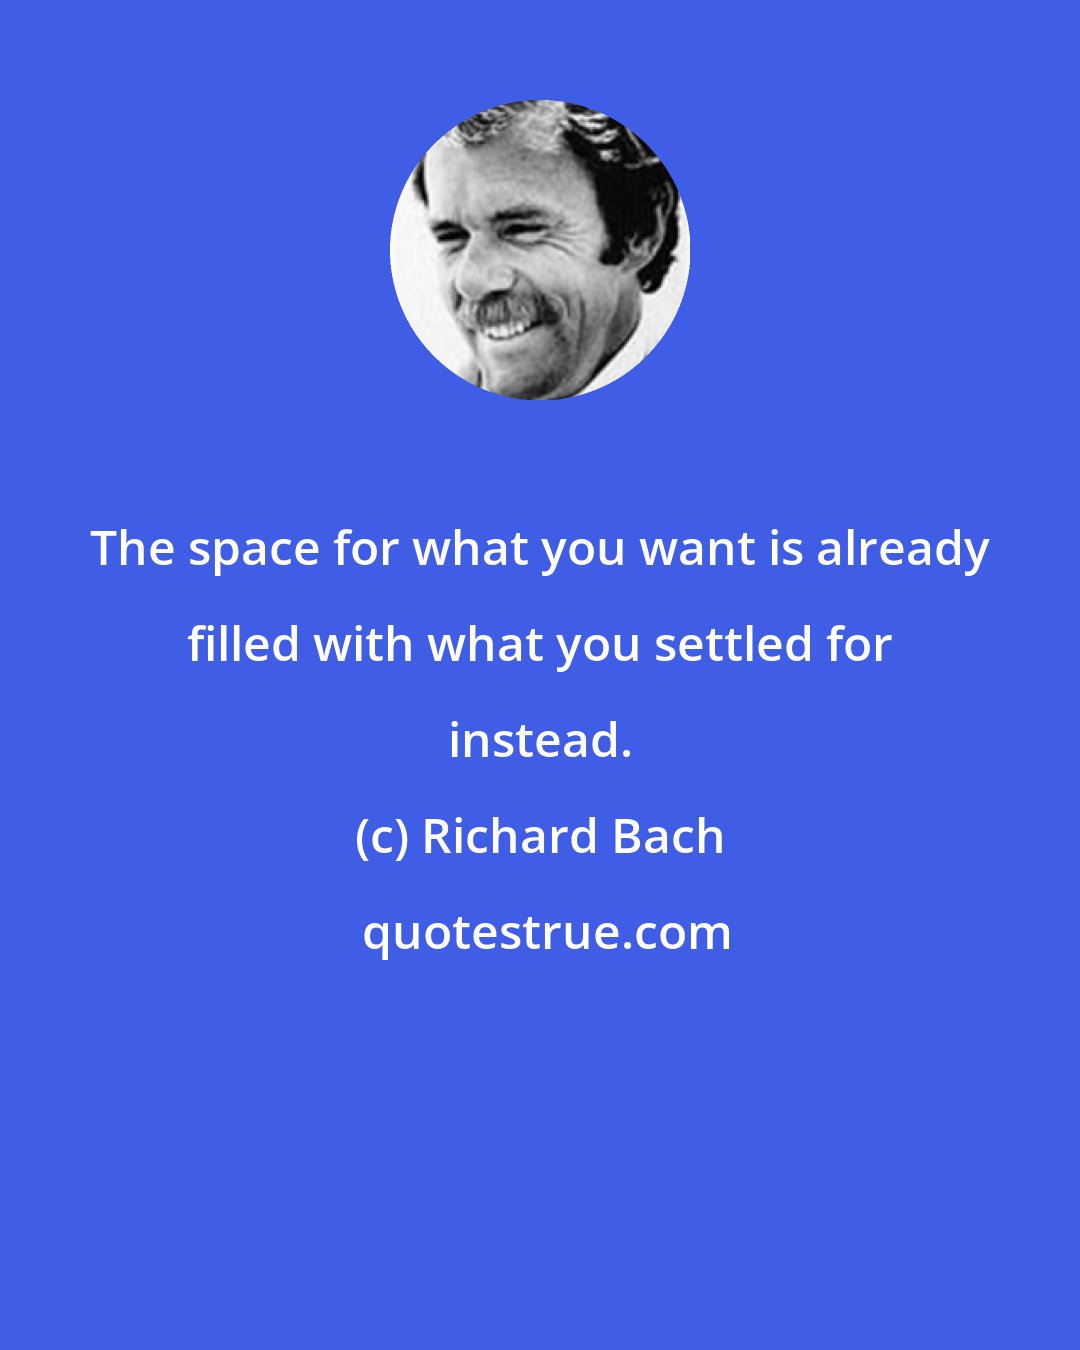 Richard Bach: The space for what you want is already filled with what you settled for instead.